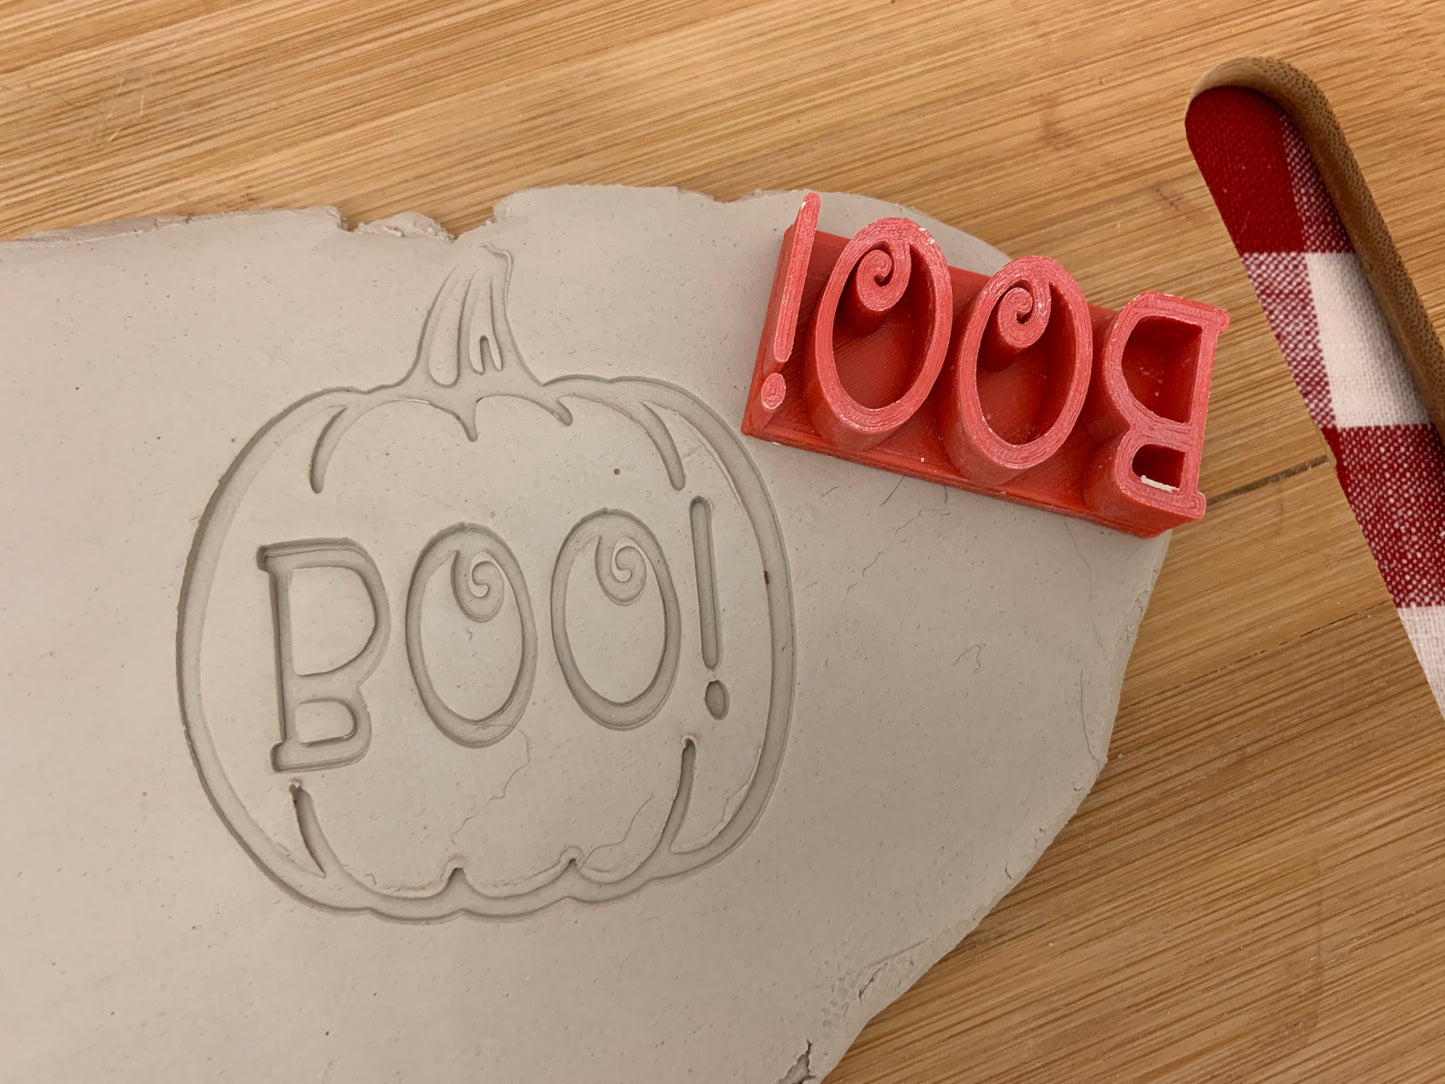 Halloween "BOO" word stamp - plastic 3D printed, multiple sizes